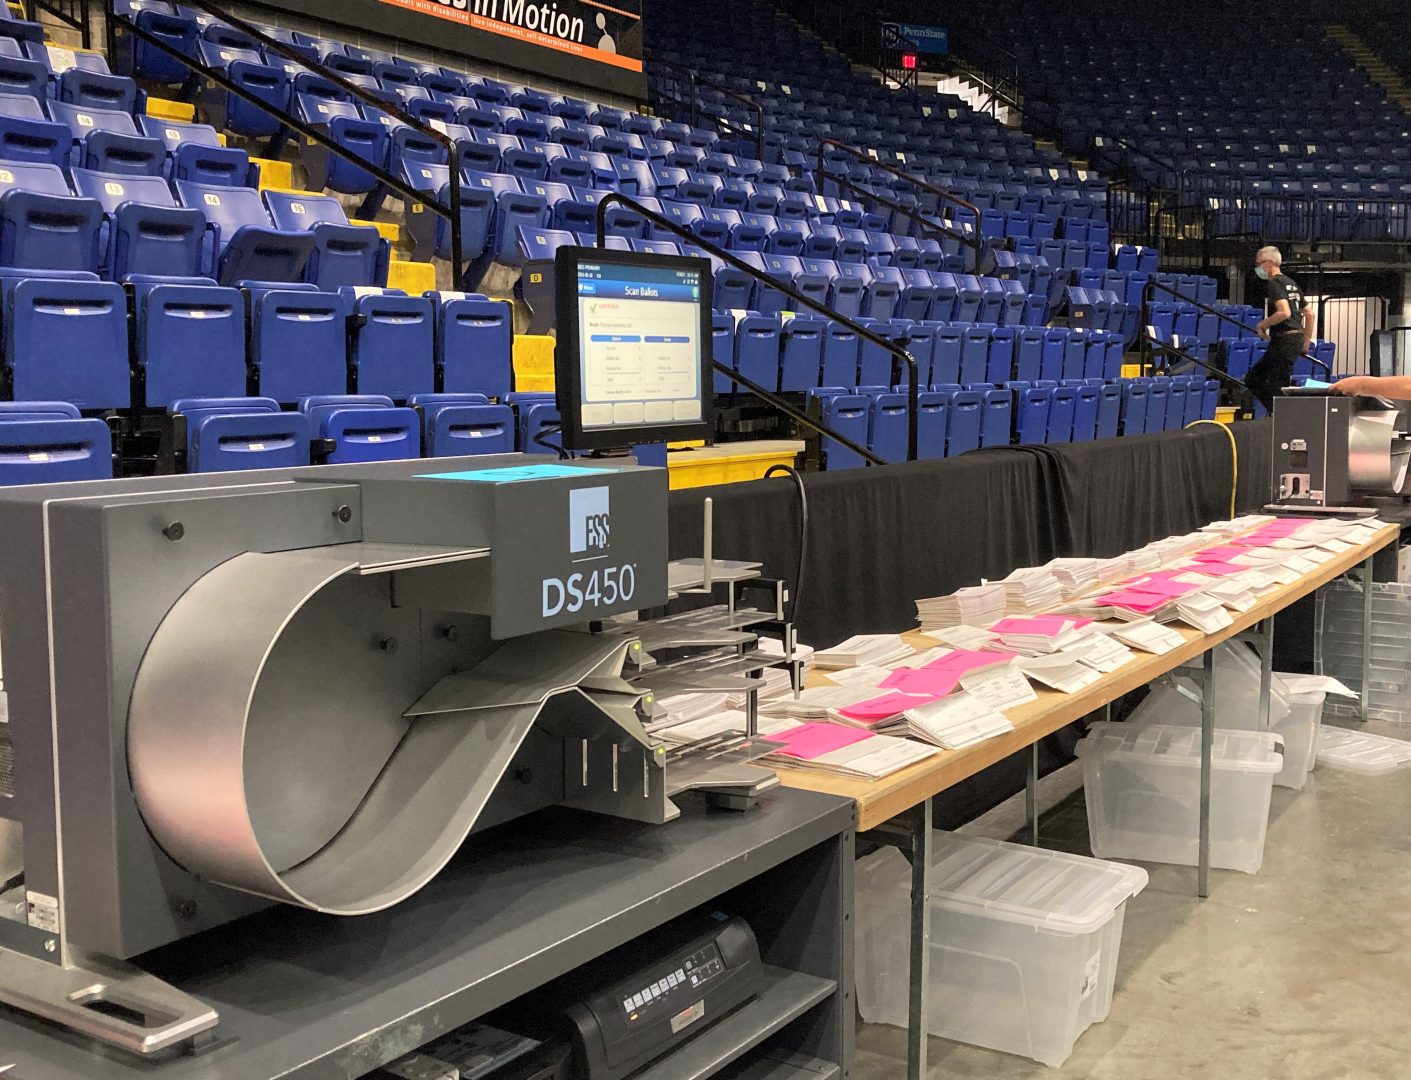 Mail-in ballots from the 2021 primary are ready to be scanned by Berks Election Services.